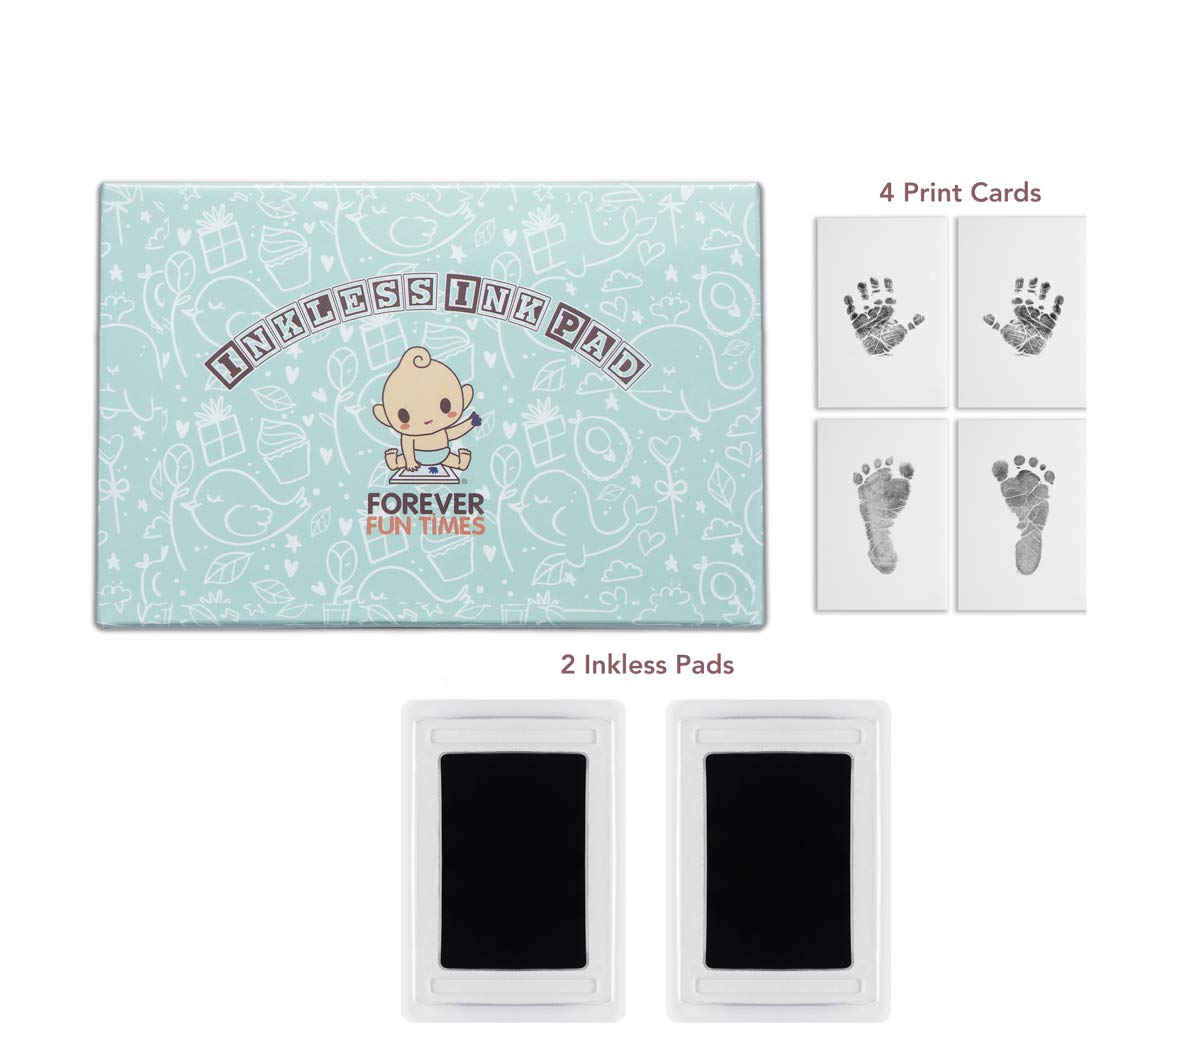 No-Touch Inkless Baby Hand and Footprint Kit, Kuwait